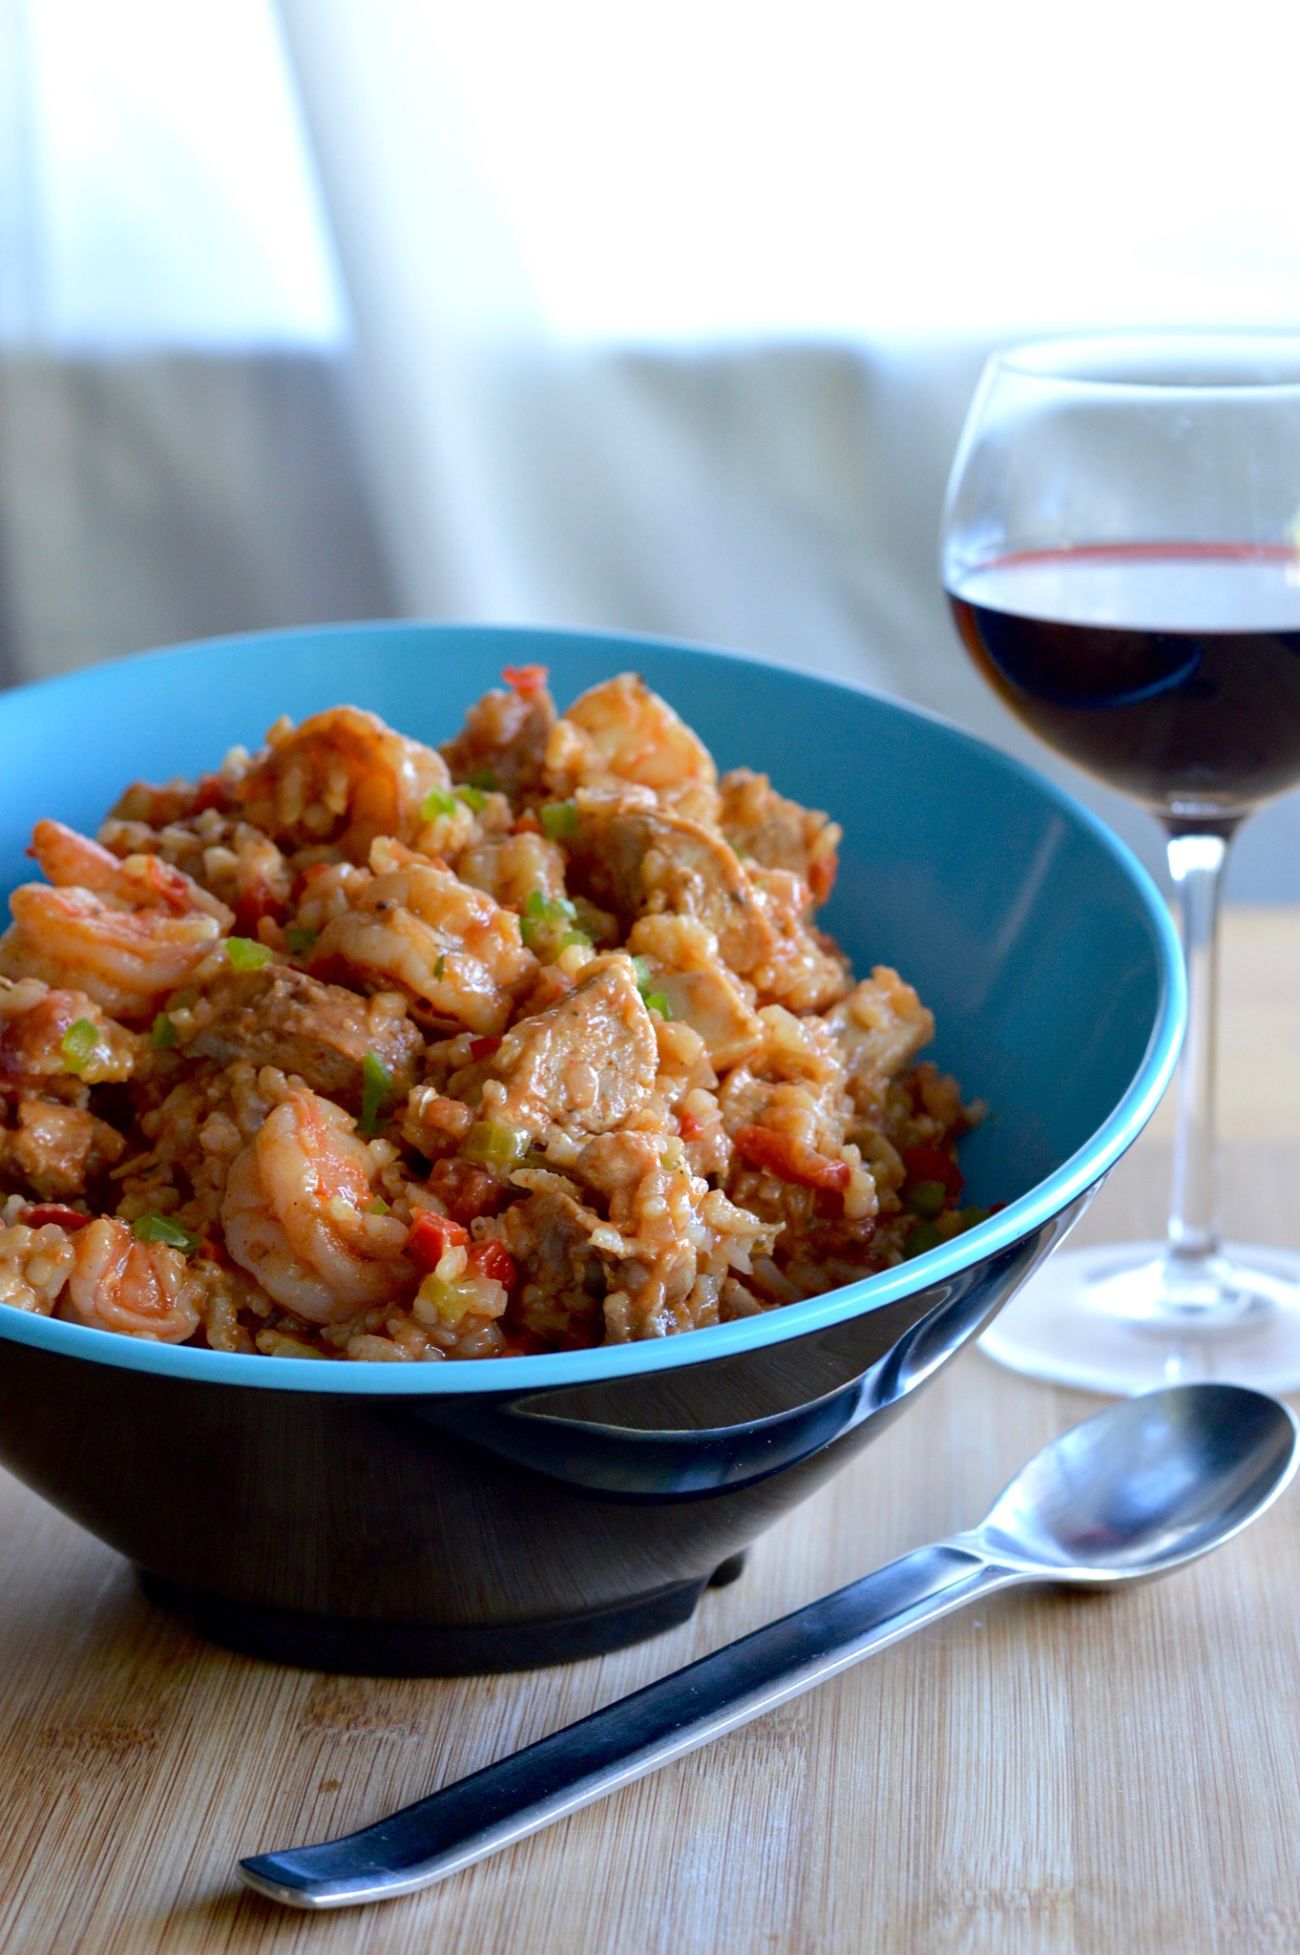 This one pot Smoky Jambalaya is great for any get together when you are looking for easy, tasty, and not a fussy meal. It's full of flavor and pairs well with any Granacha wine.